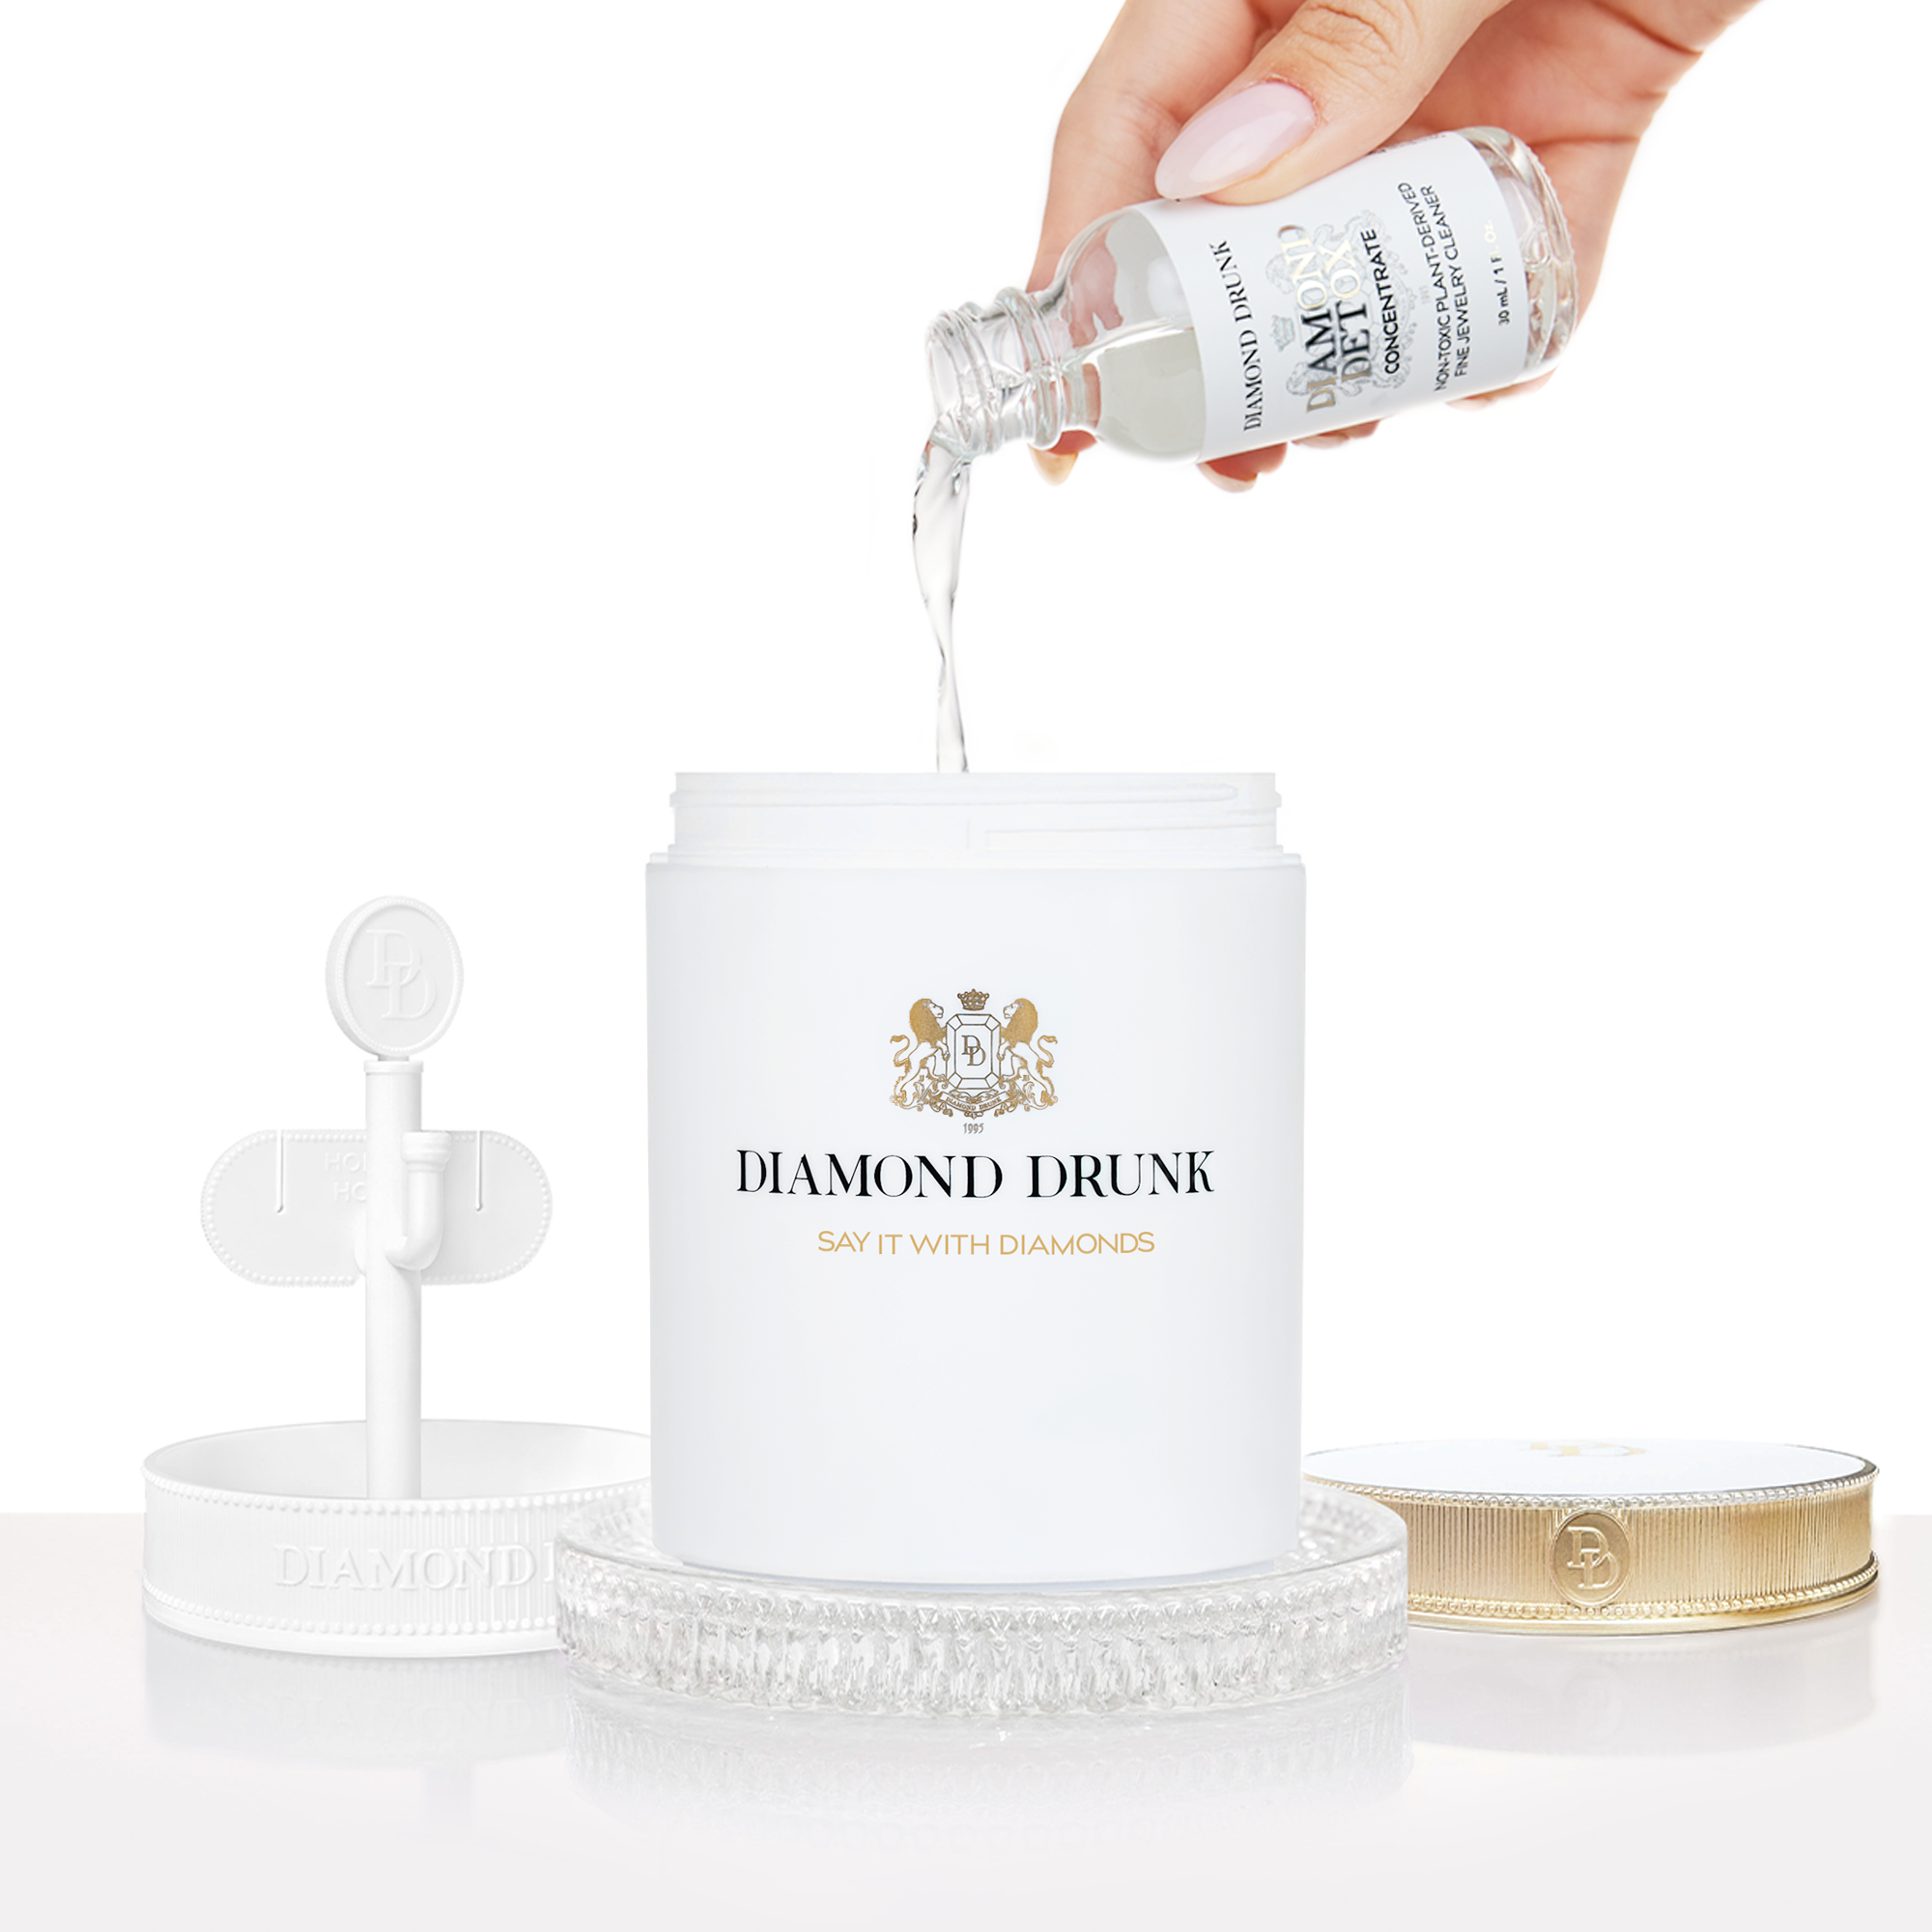 Say It With Diamonds Collection- Jewelry Cleaner